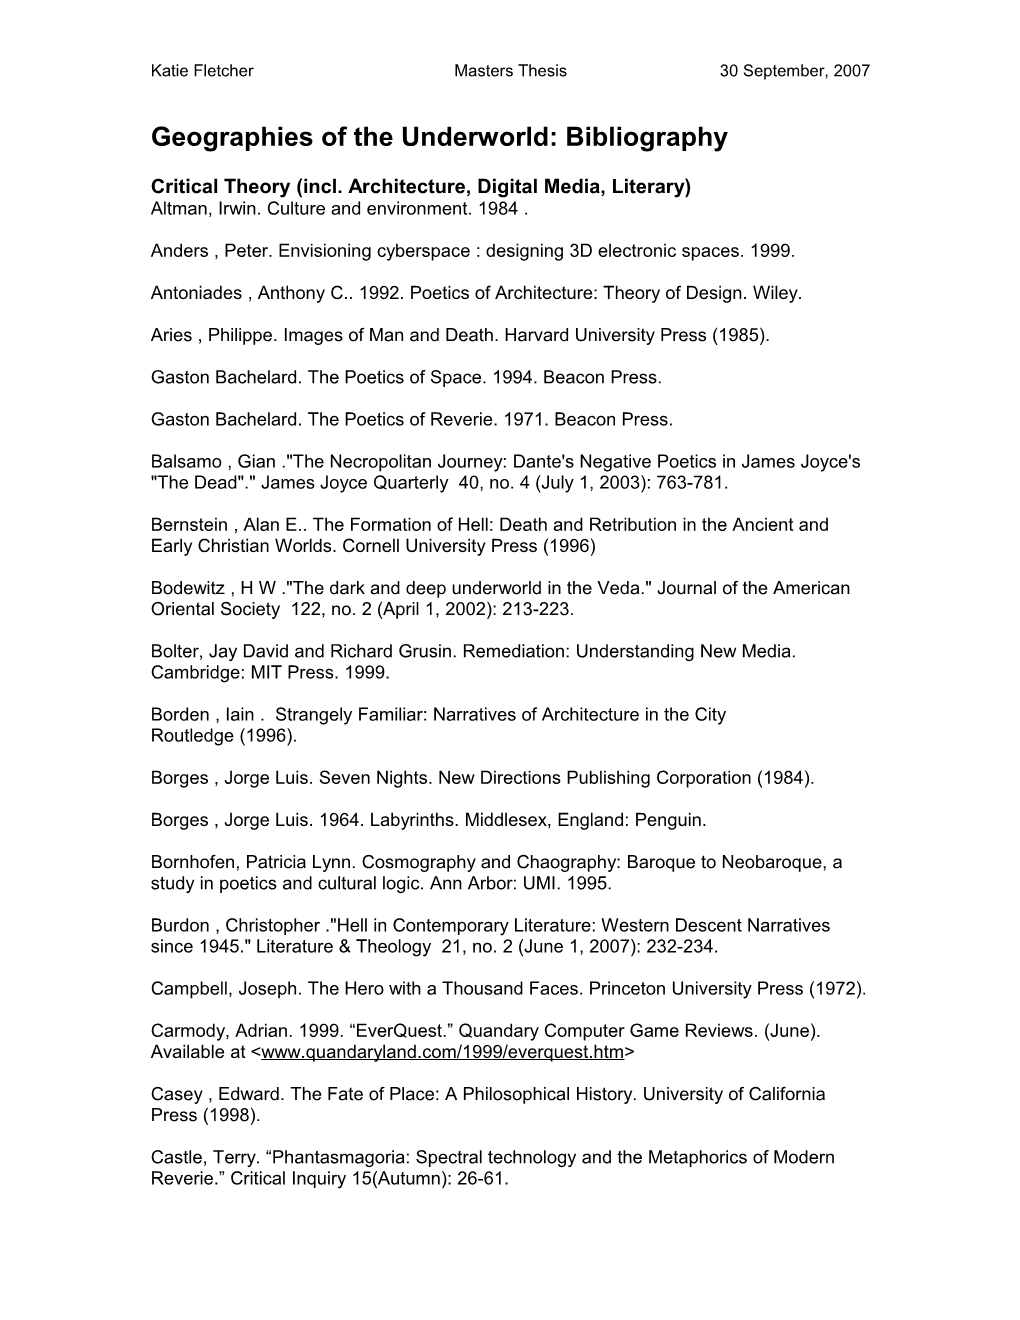 Geographies of the Underworld: Bibliography